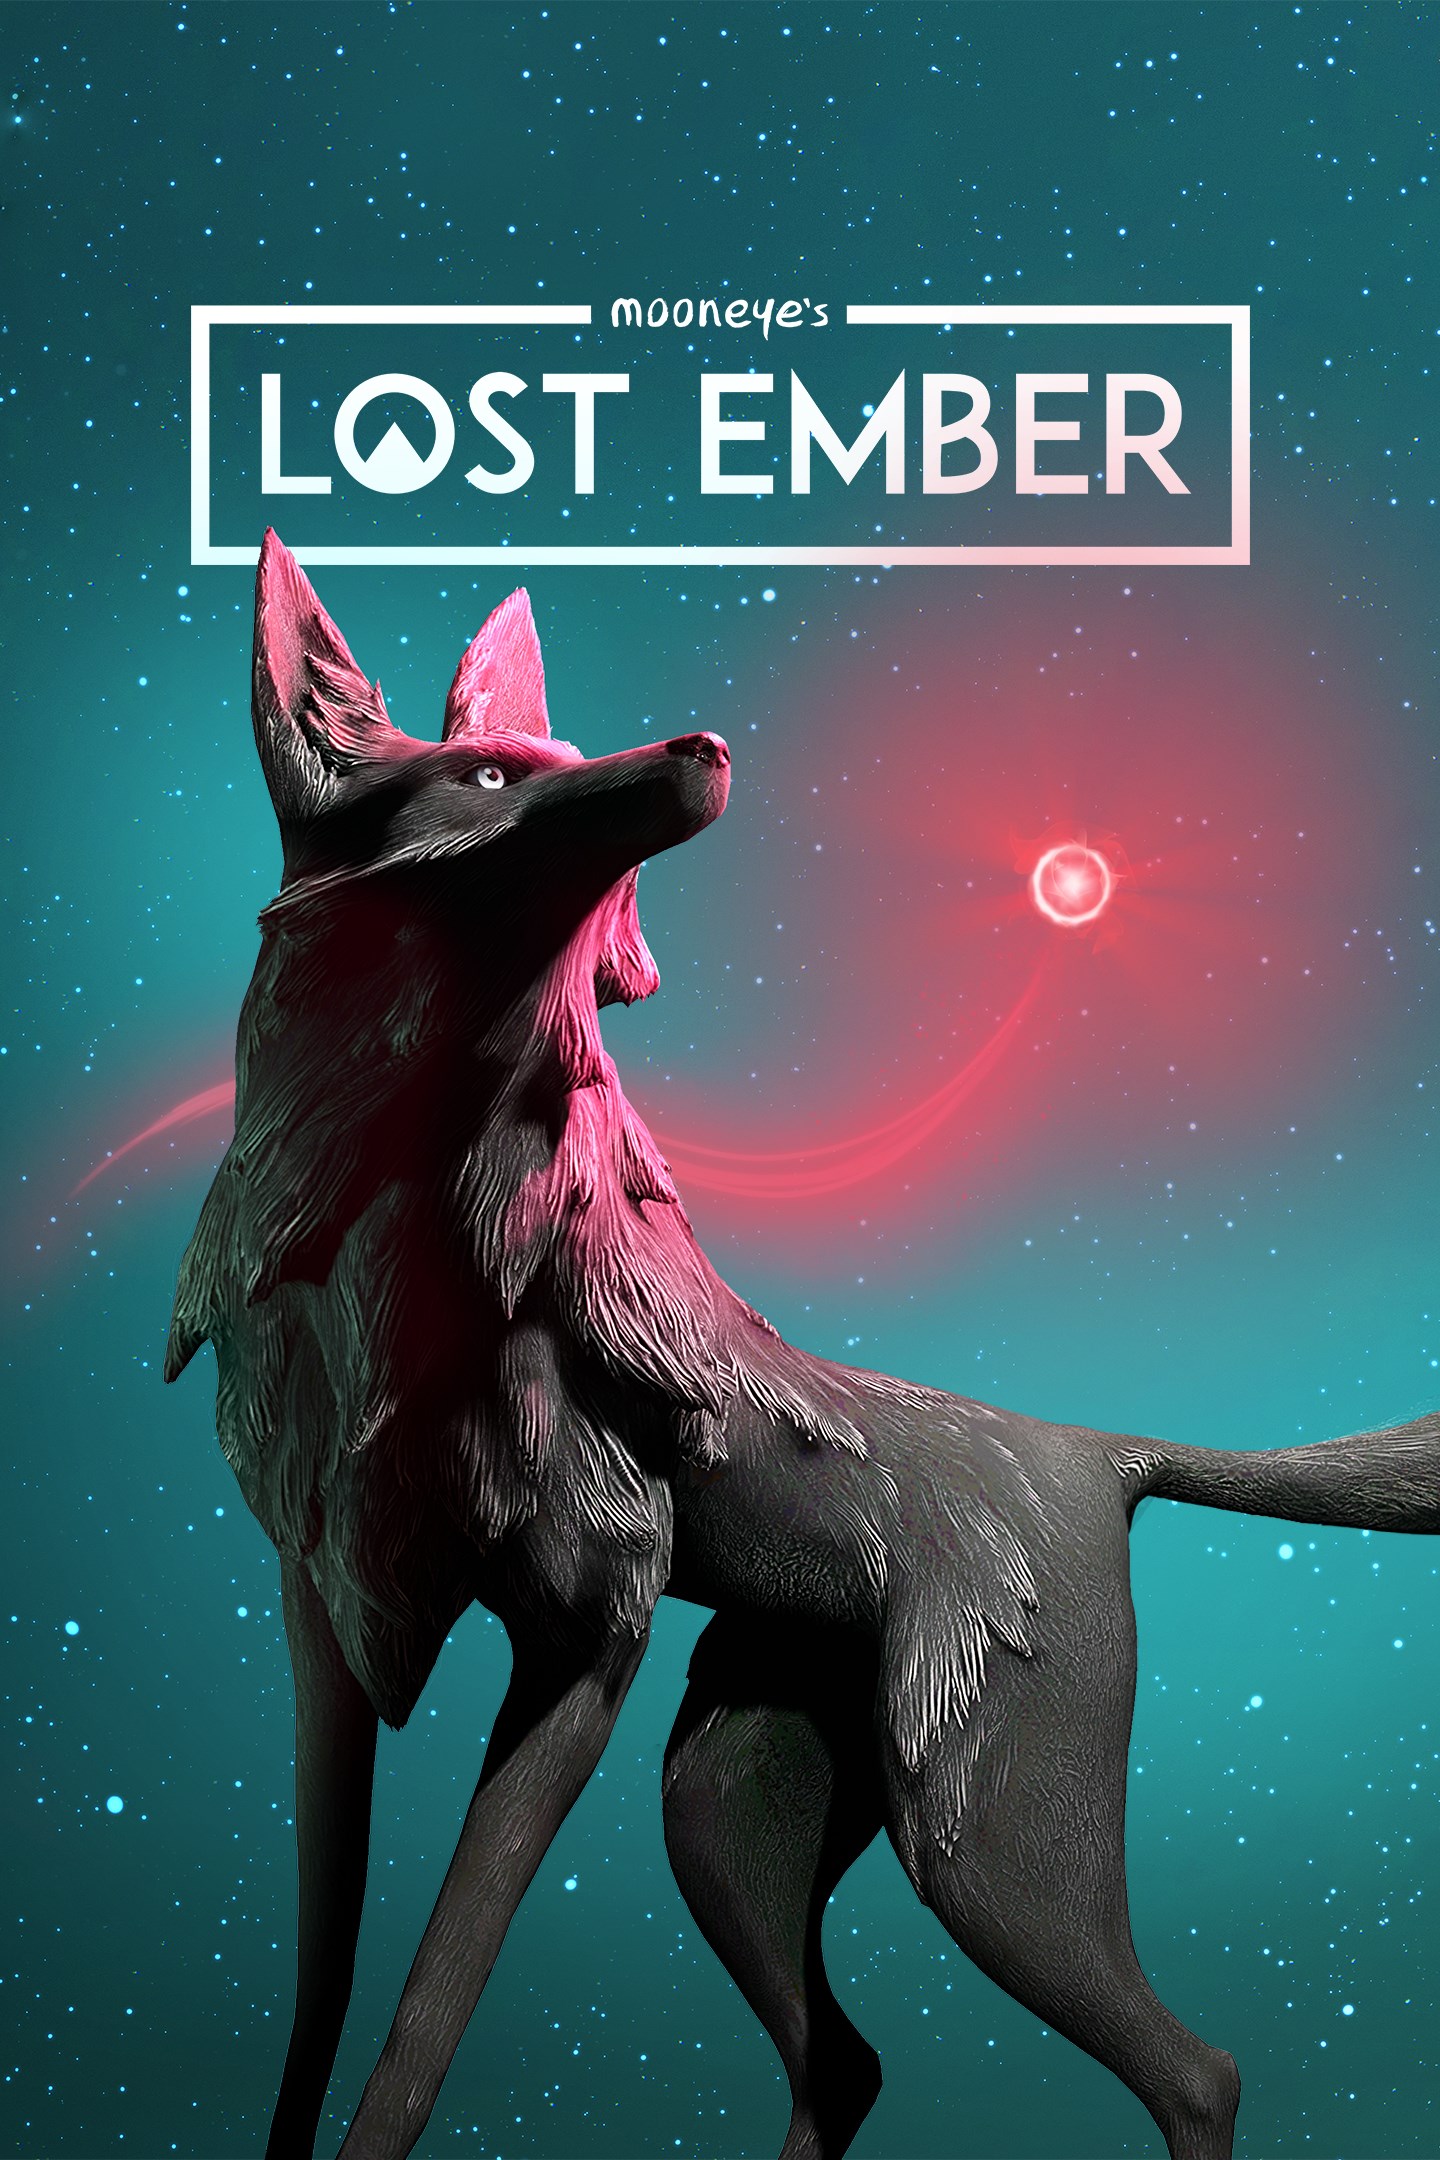 lost ember xbox one amazon